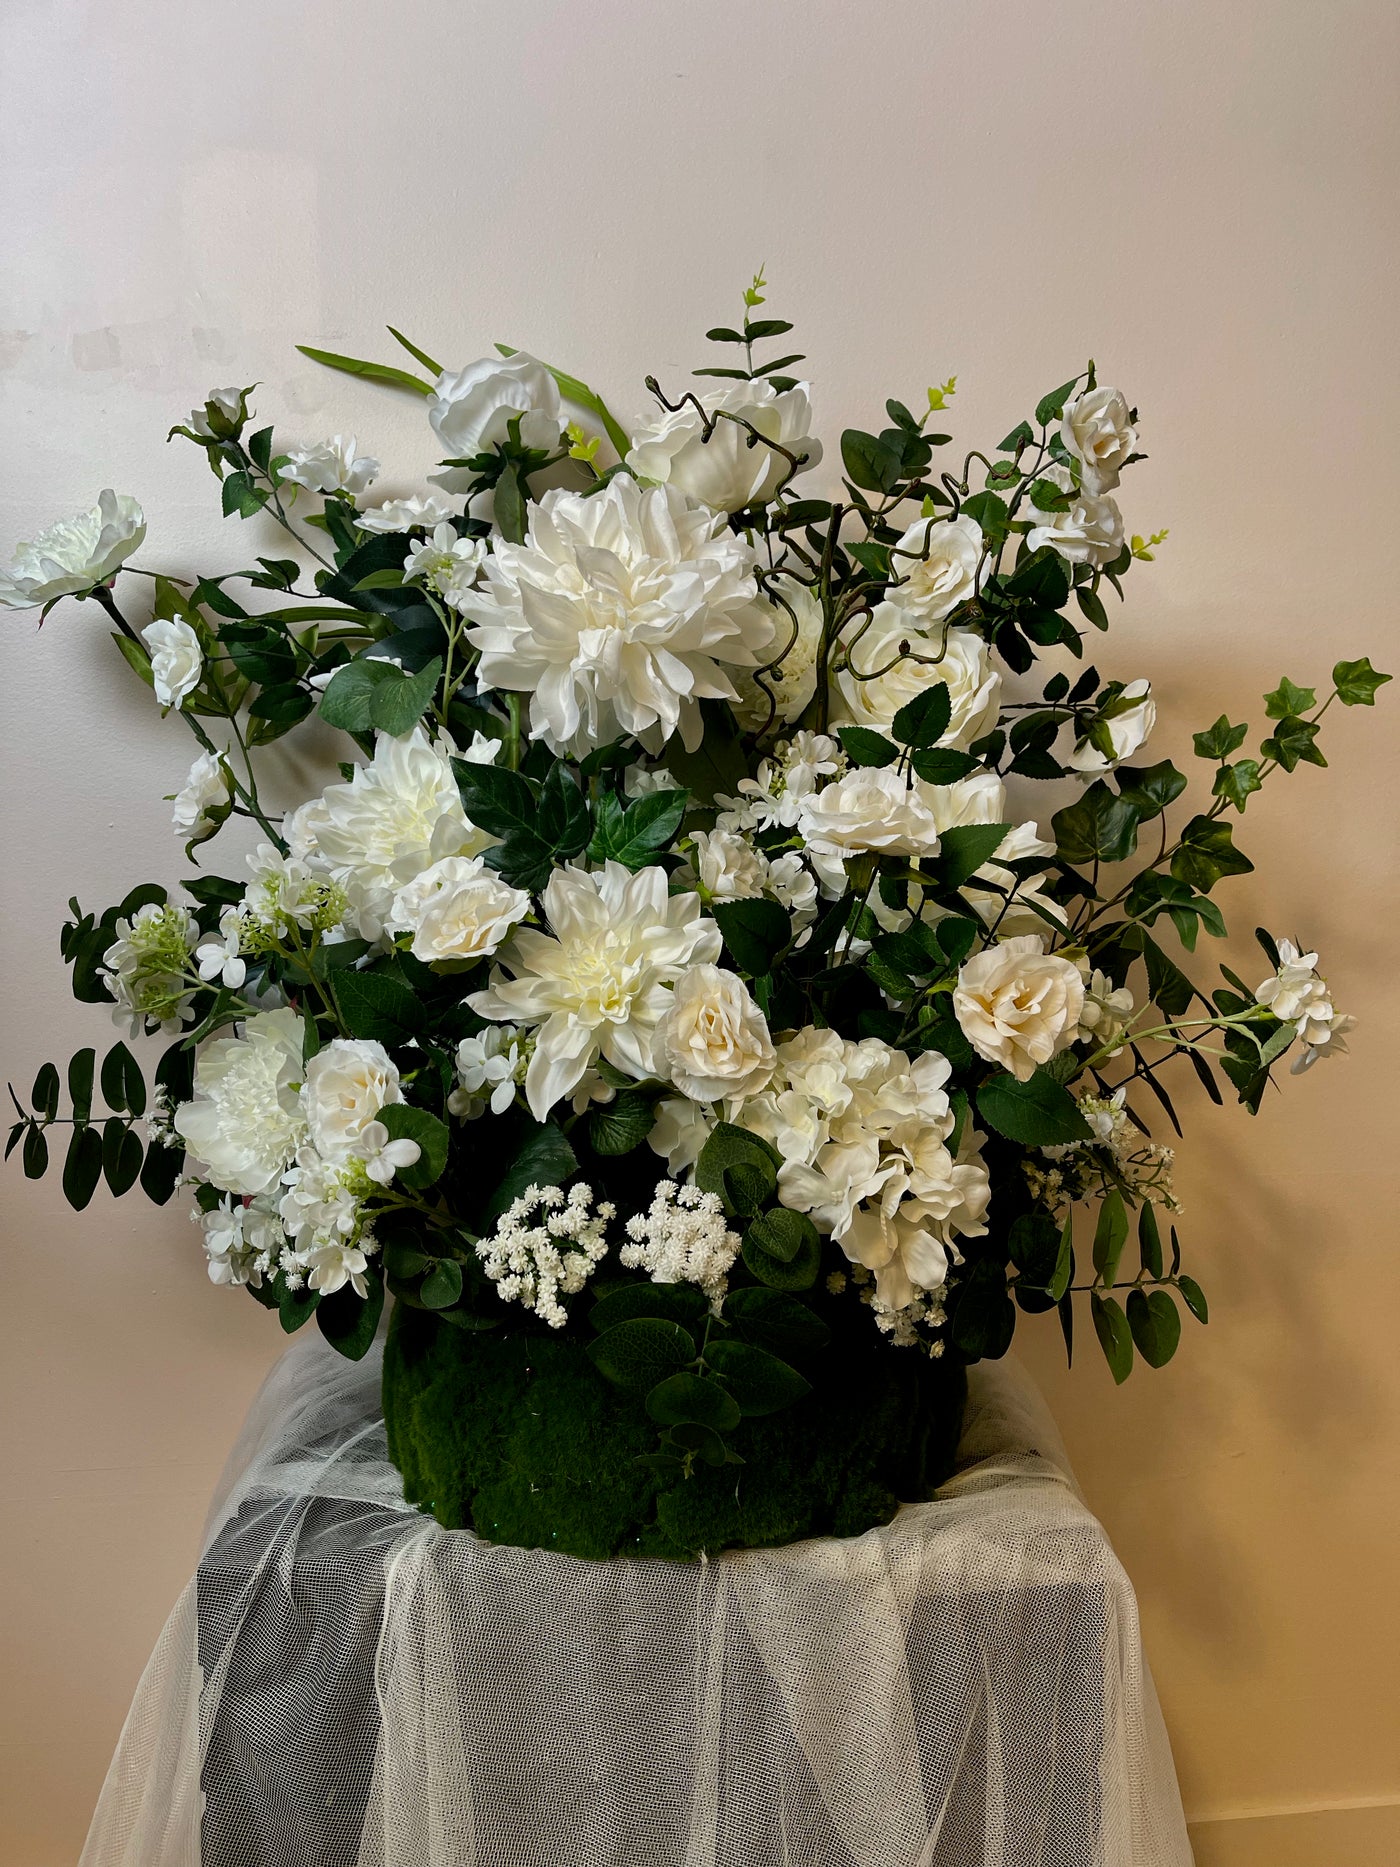 Crisp white dahlias, roses and baby's breath enveloped in dark green eucalyptus  are combined to create this dramatic 2.5 x 3 foot wedding floral arrangement. This was designed to be used at the base of a floral arch but it can also be used at the base of a sweetheart head table, or on either side of the alter at a church. The options are endless.